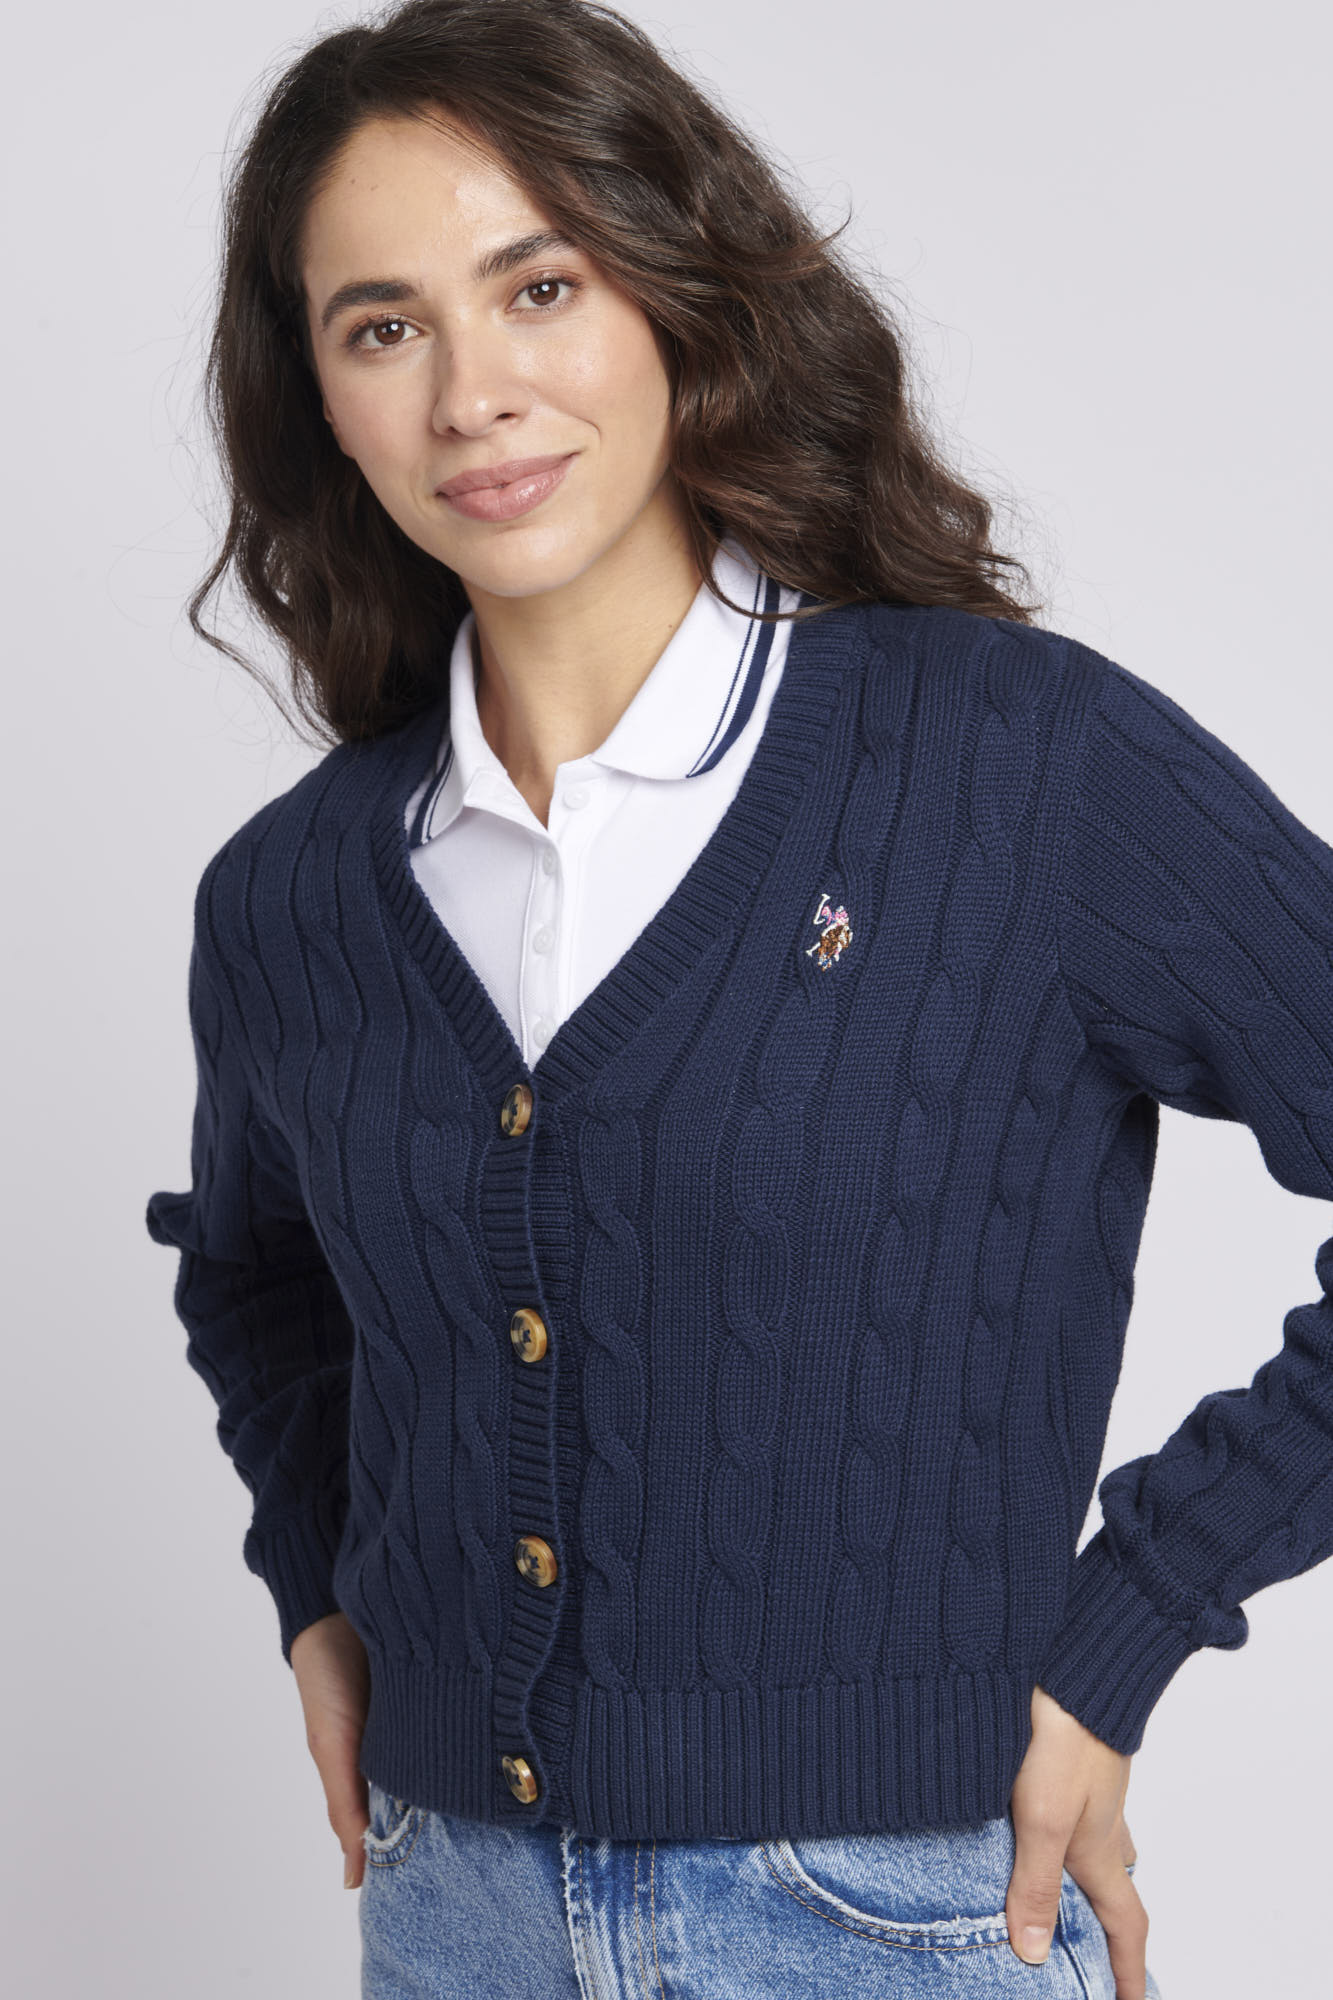 Womens Cable Knit Cropped Cardigan in Navy Iris